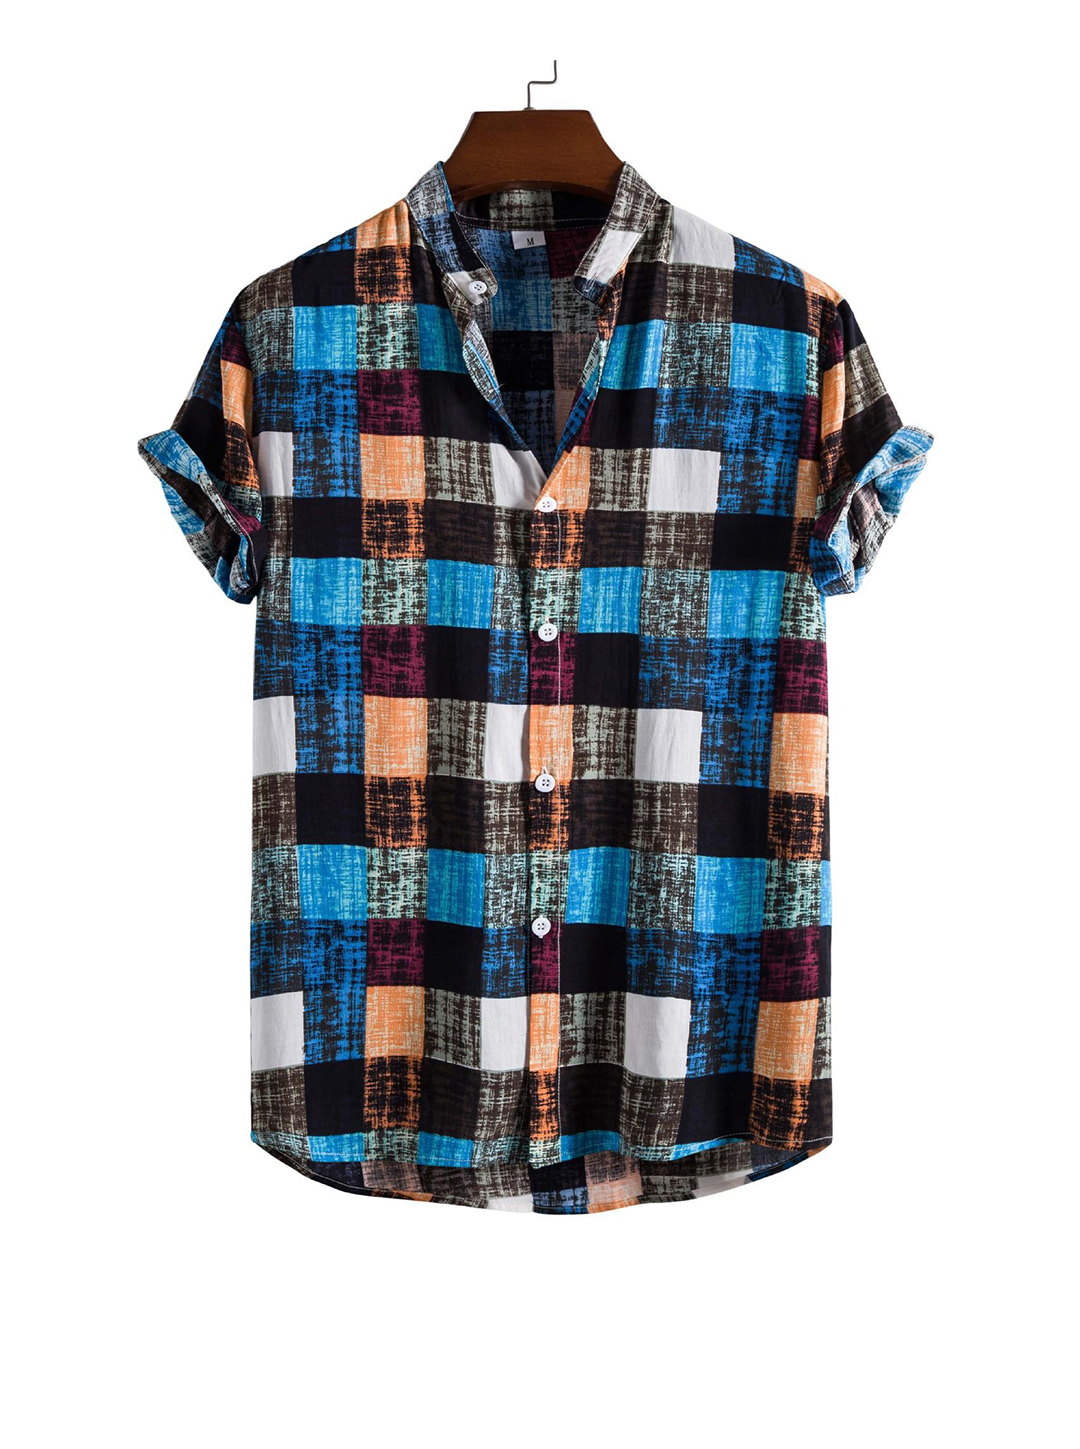 Poisonstreetwear Men's Colorful Check Print Faux Linen Holiday Casual Short Sleeve Shirts-poisonstreetwear.com